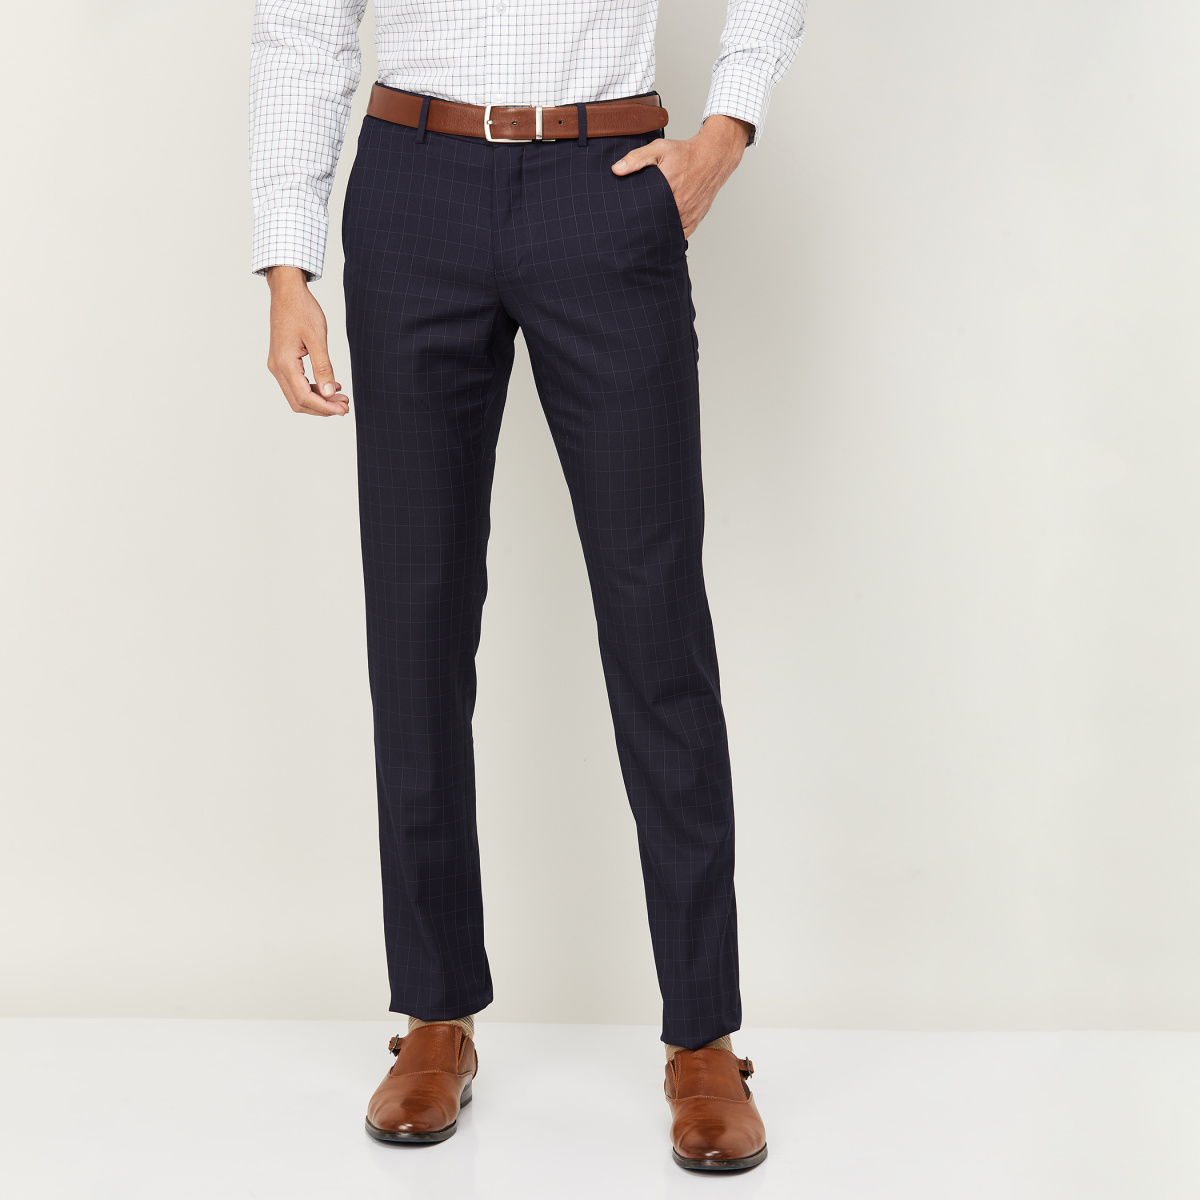 Buy Louis Philippe Brown Trousers Online  695391  Louis Philippe